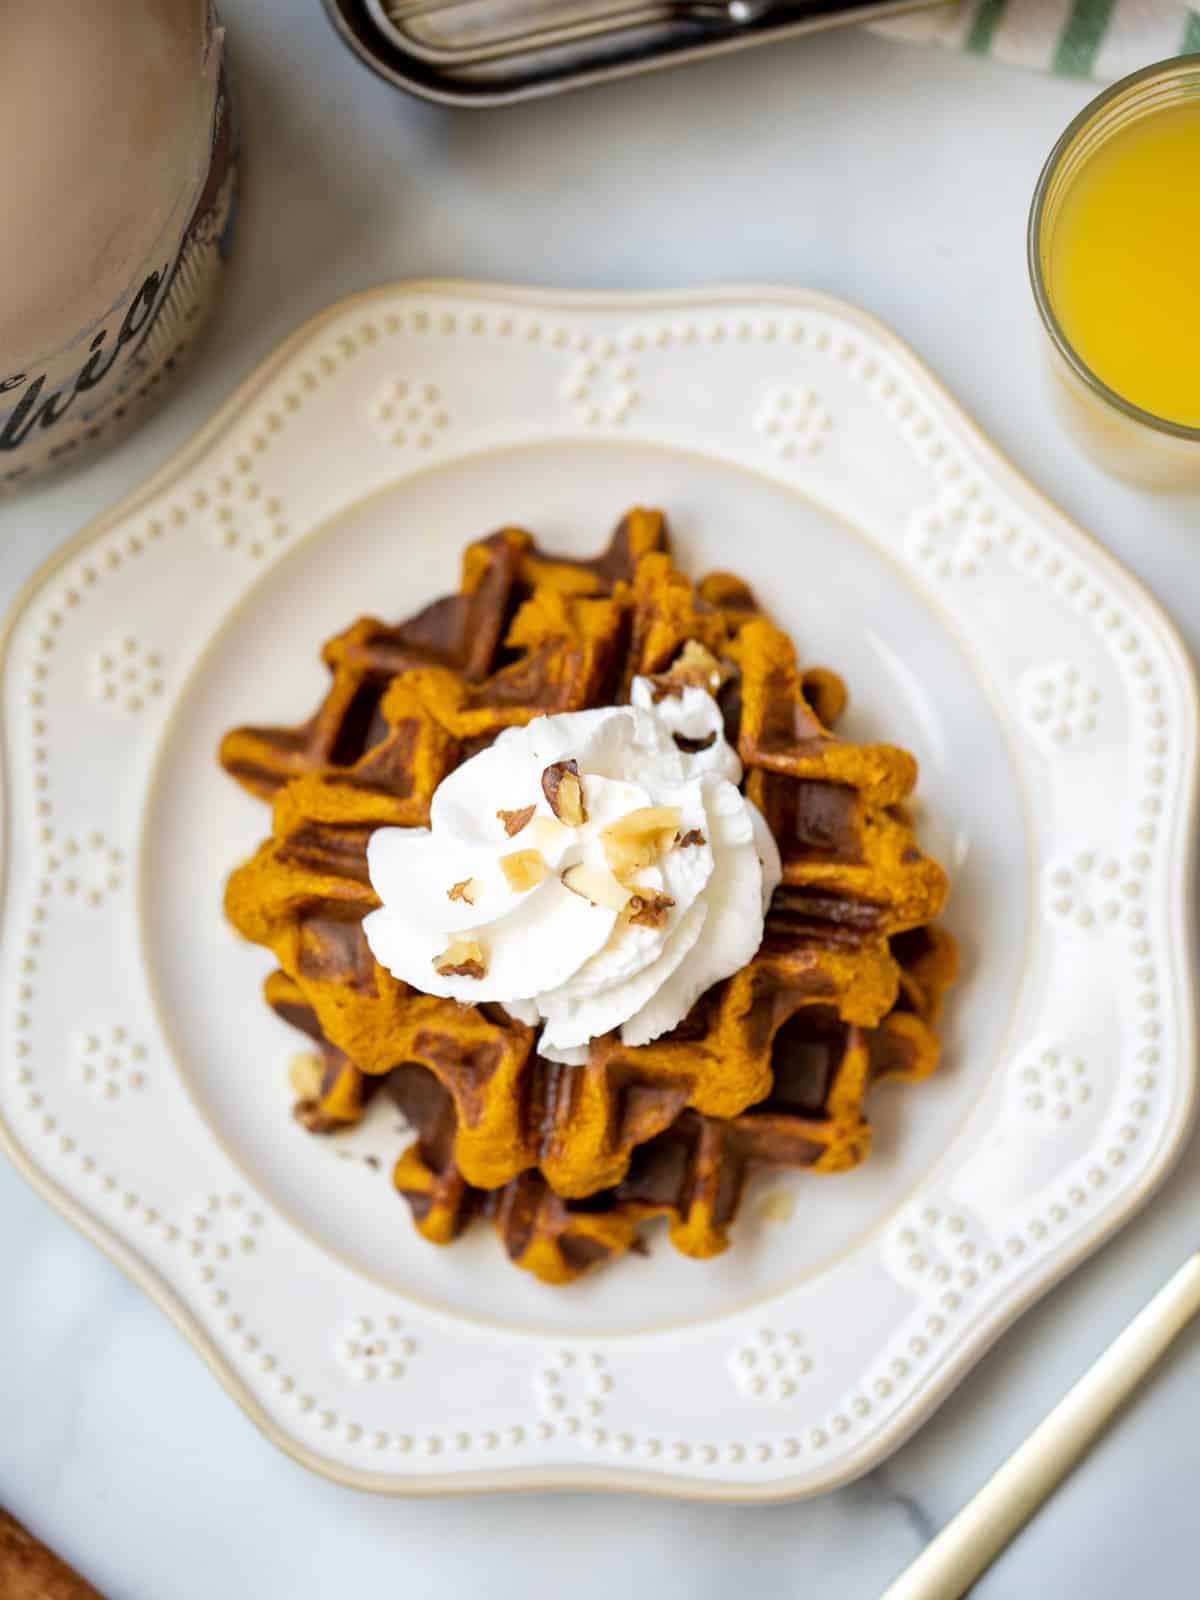 Top view of Sweet Potato Waffles on cream plate topped with whipped cream, maple syrup, and chopped walnuts.